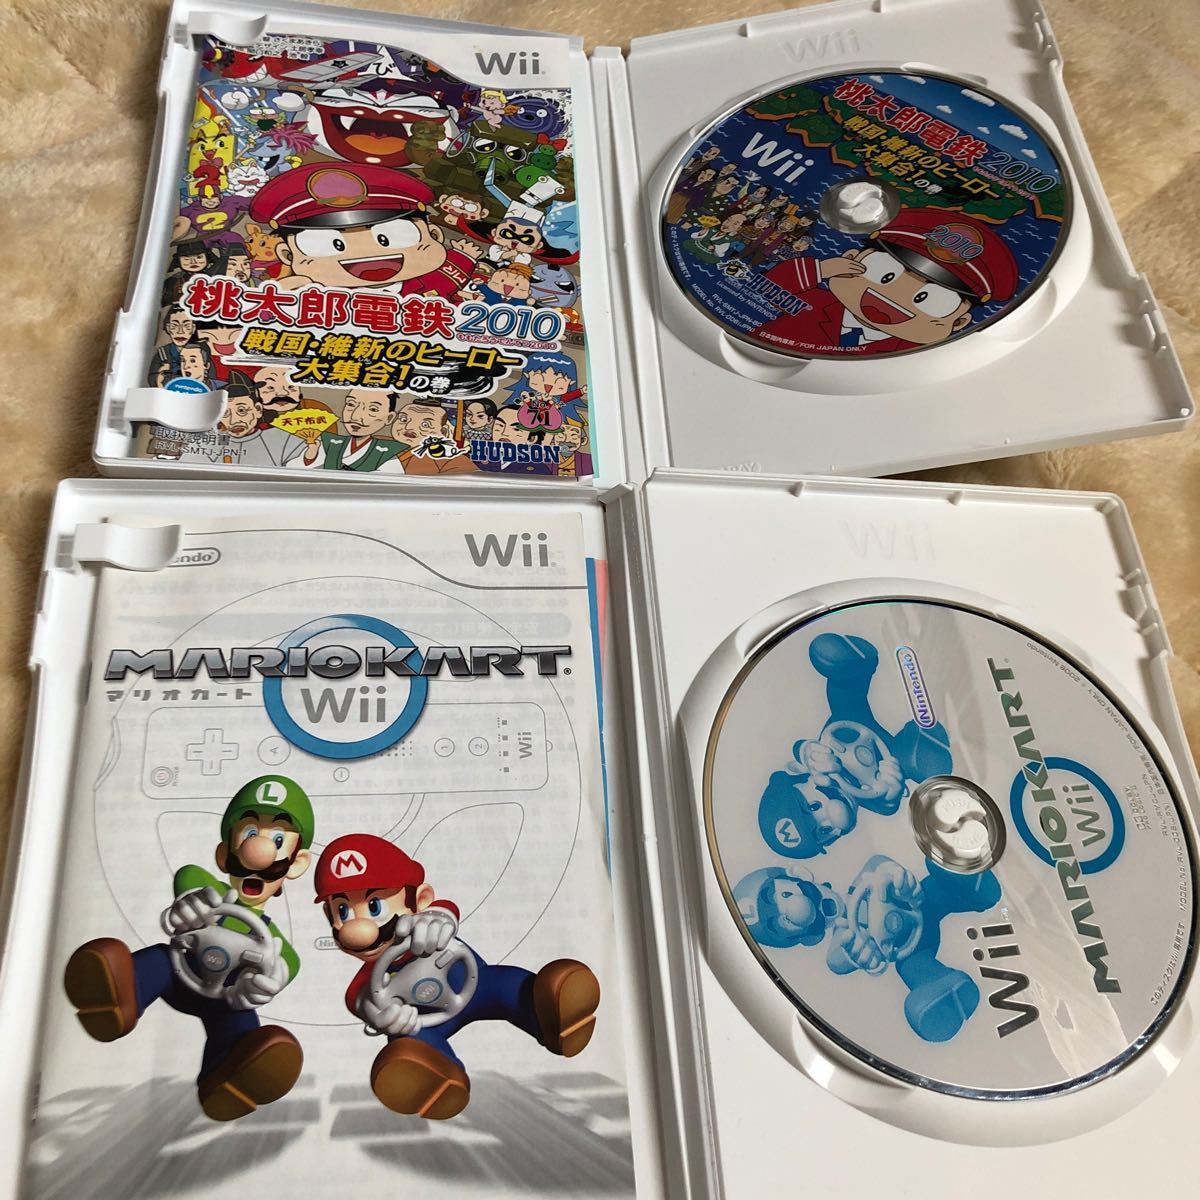 Wiiソフト　桃太郎電鉄　維新のヒーロー　マリオカート　wii 